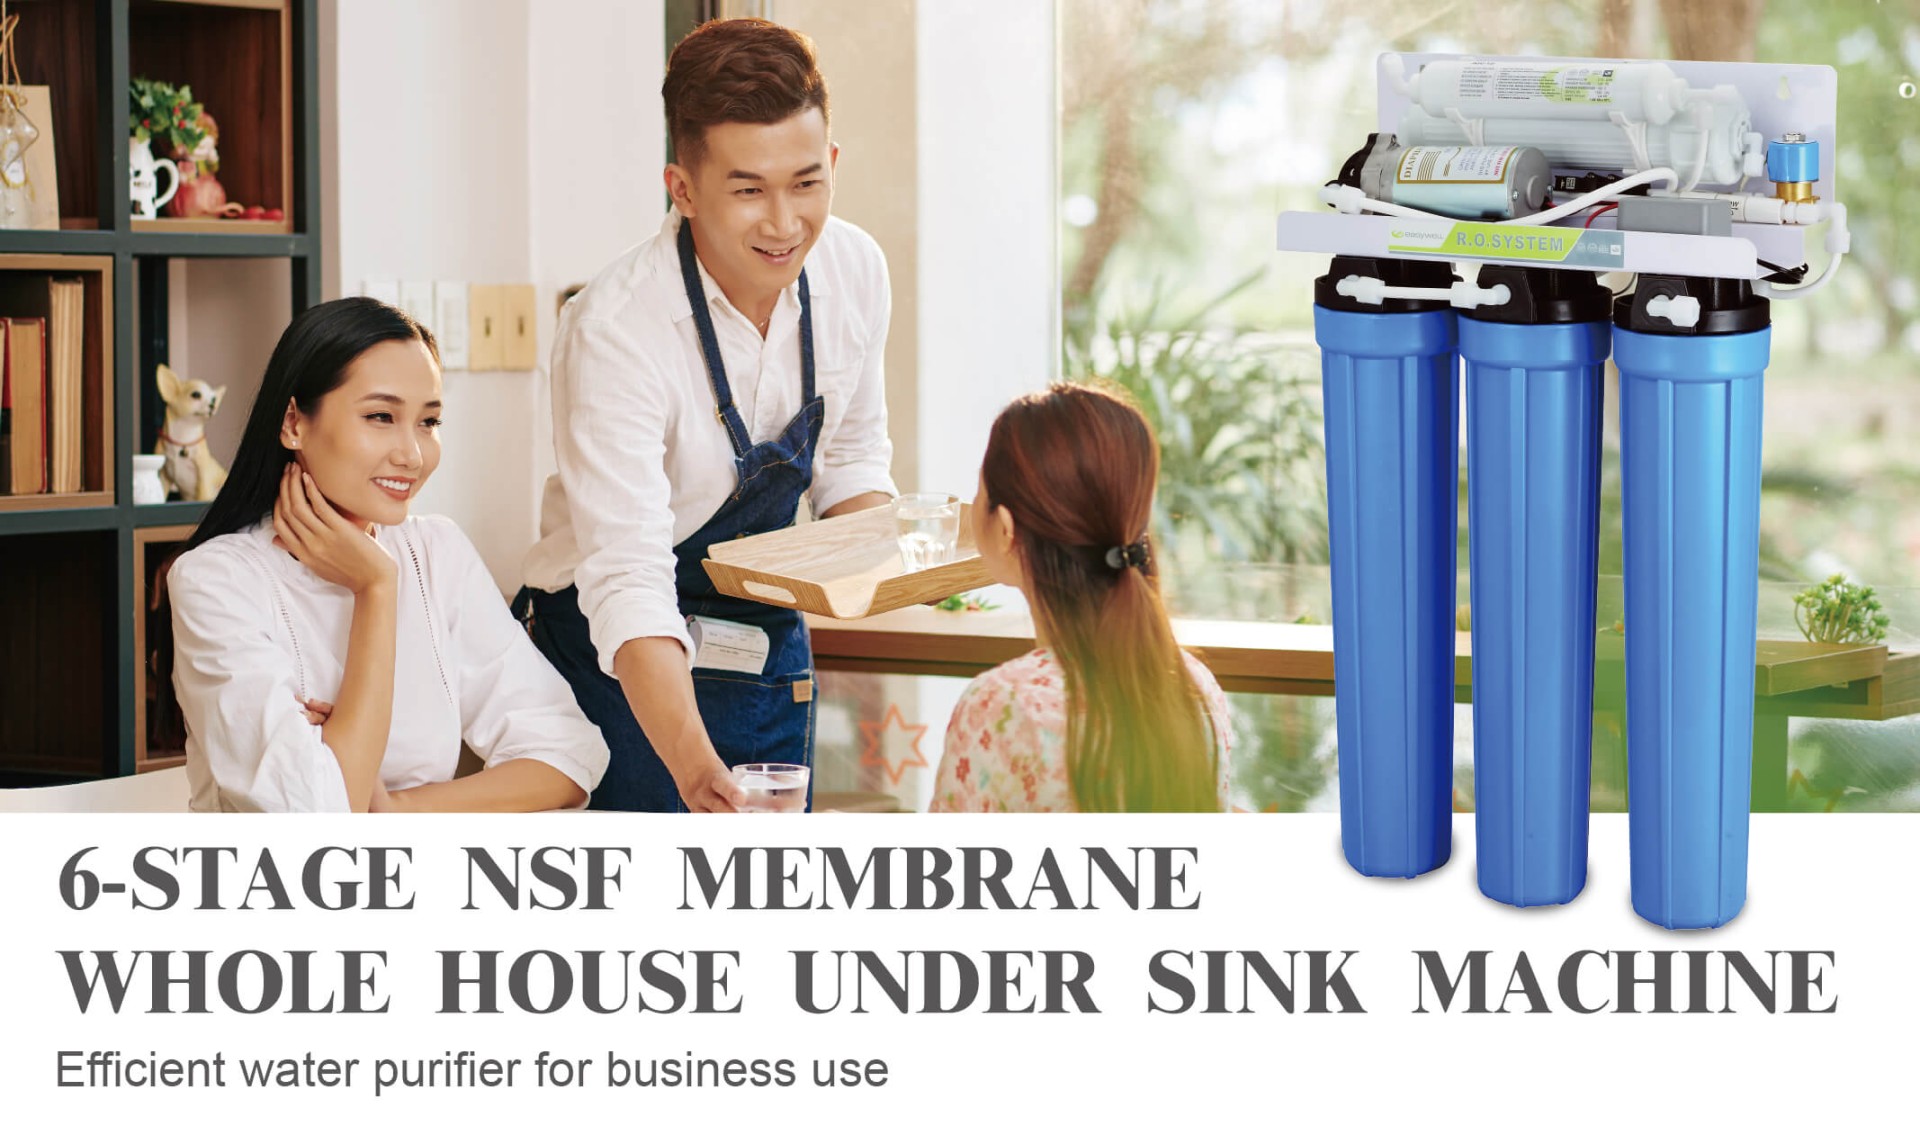 6-STAGE NSF MEMBRANE WHOLE HOUSE UNDER SINK MACHINE